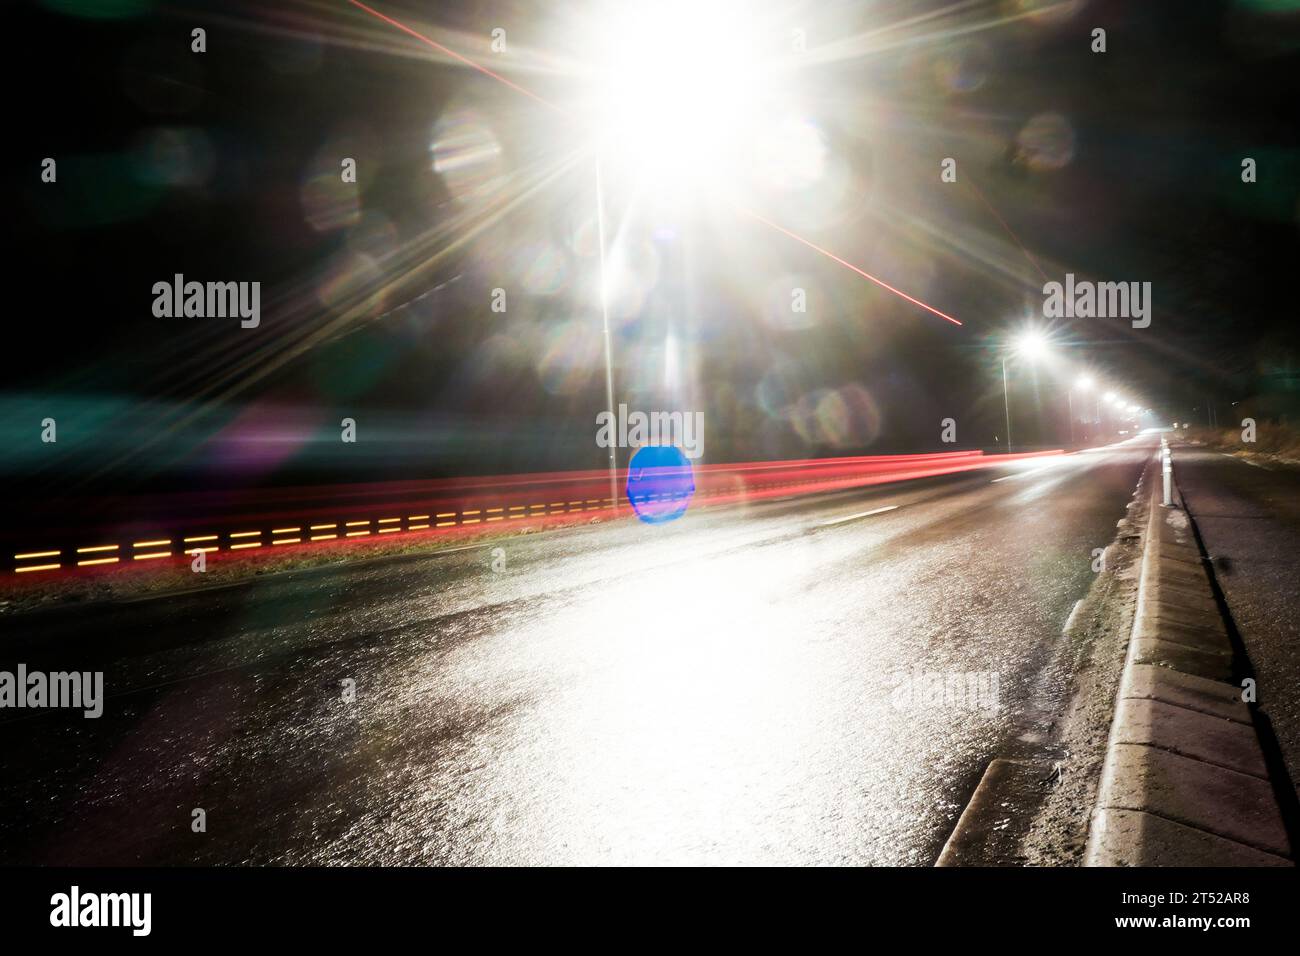 Light trail after a car during night Stock Photo